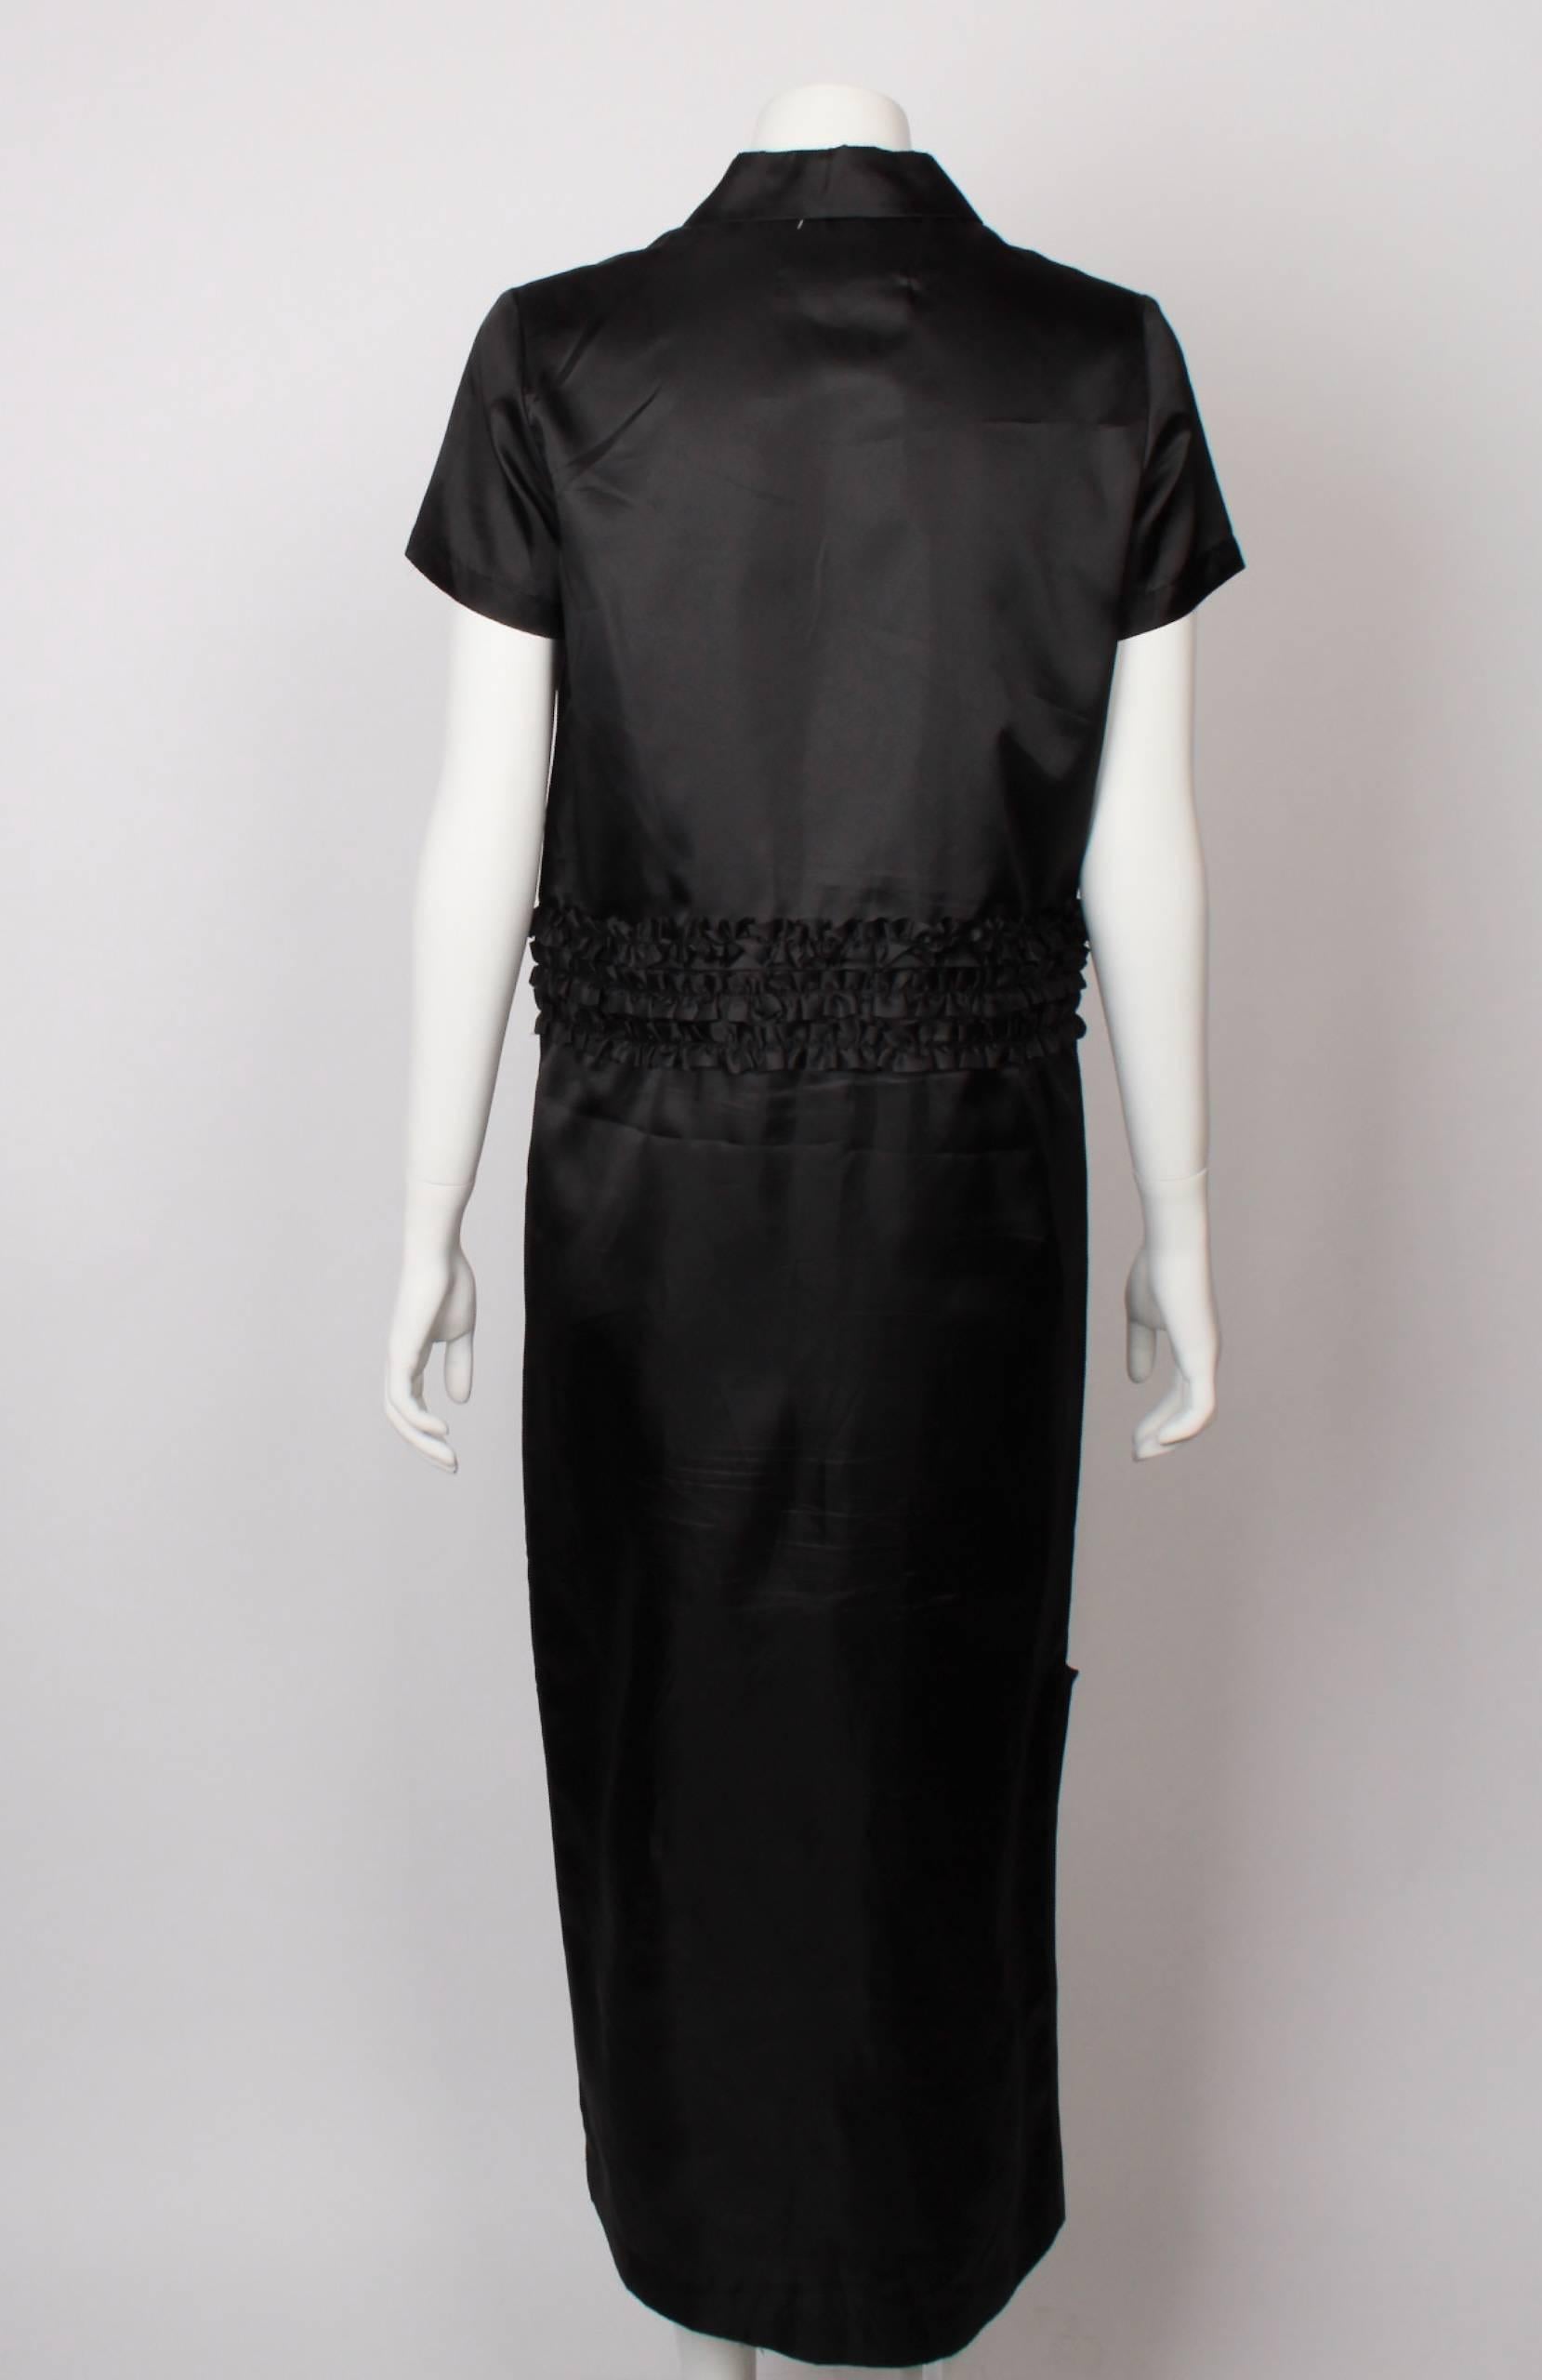 FINAL SALE
Madam Virtue & Co

COMME DES GARCONS TRICOT 2 Piece Ruffle Dress in black hi tech polyester. 
Dress cleverly converts and unzips into 2 pieces - a shirt and a skirt. Three garments in one.....
Features nickel zipper at waistline with